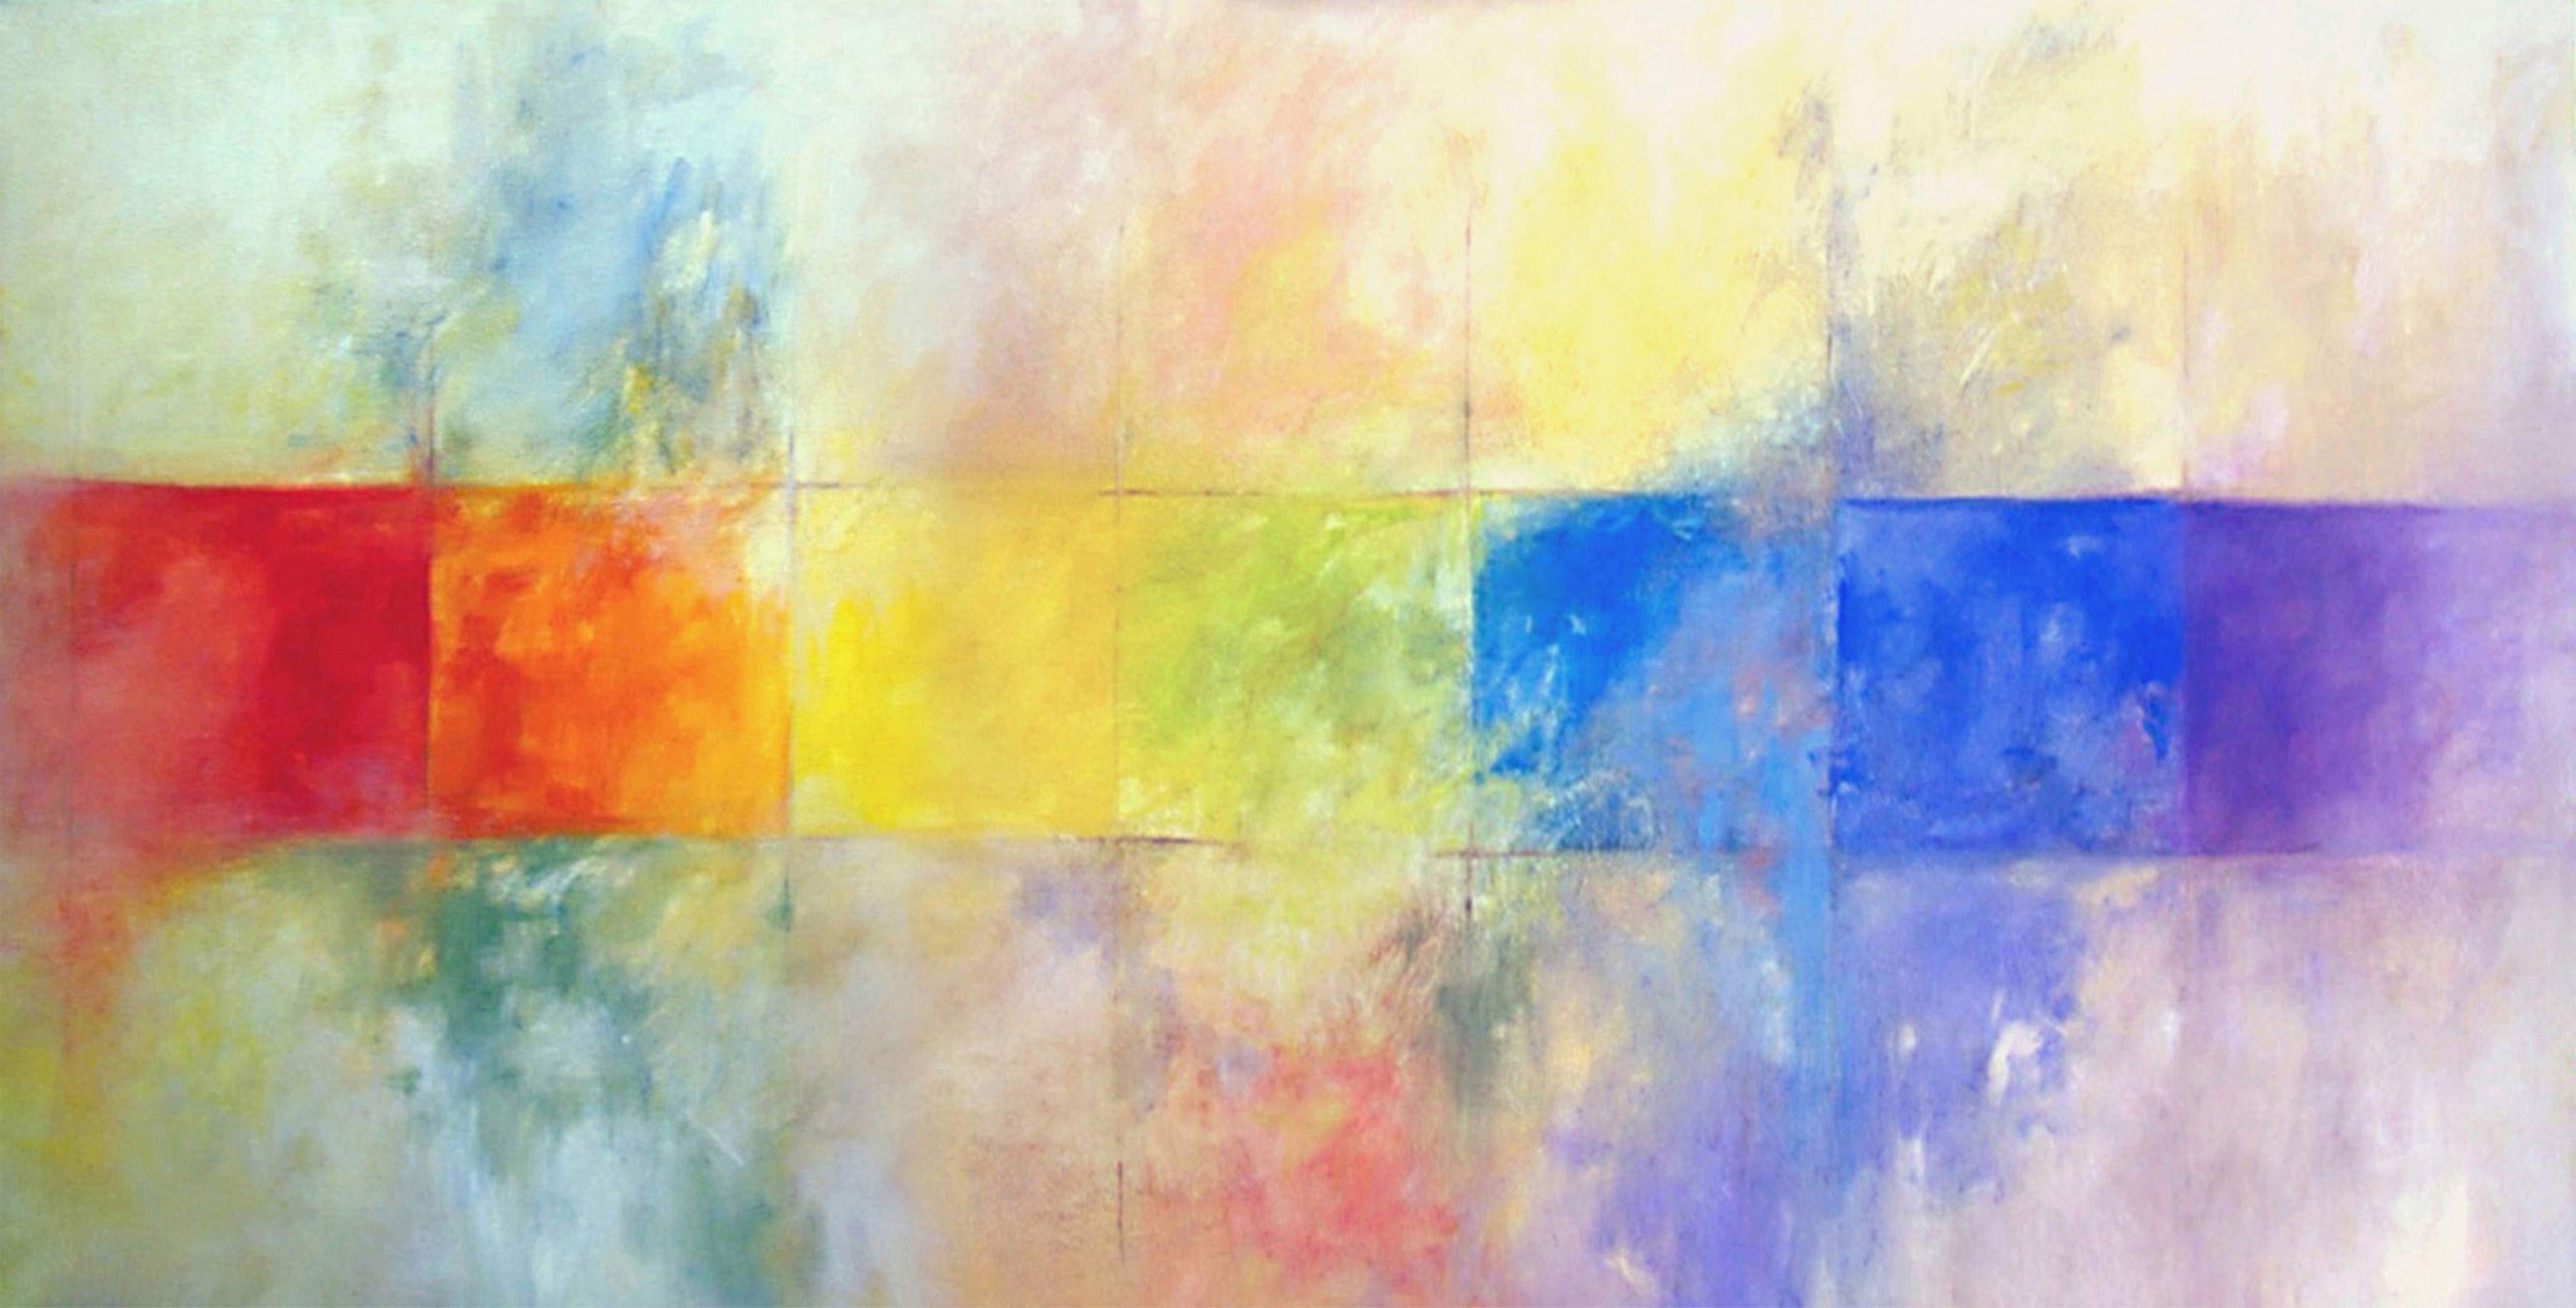 Sylvia Shanahan Abstract Painting - "Infrequency;Break the Rules", Painting, Oil on Canvas